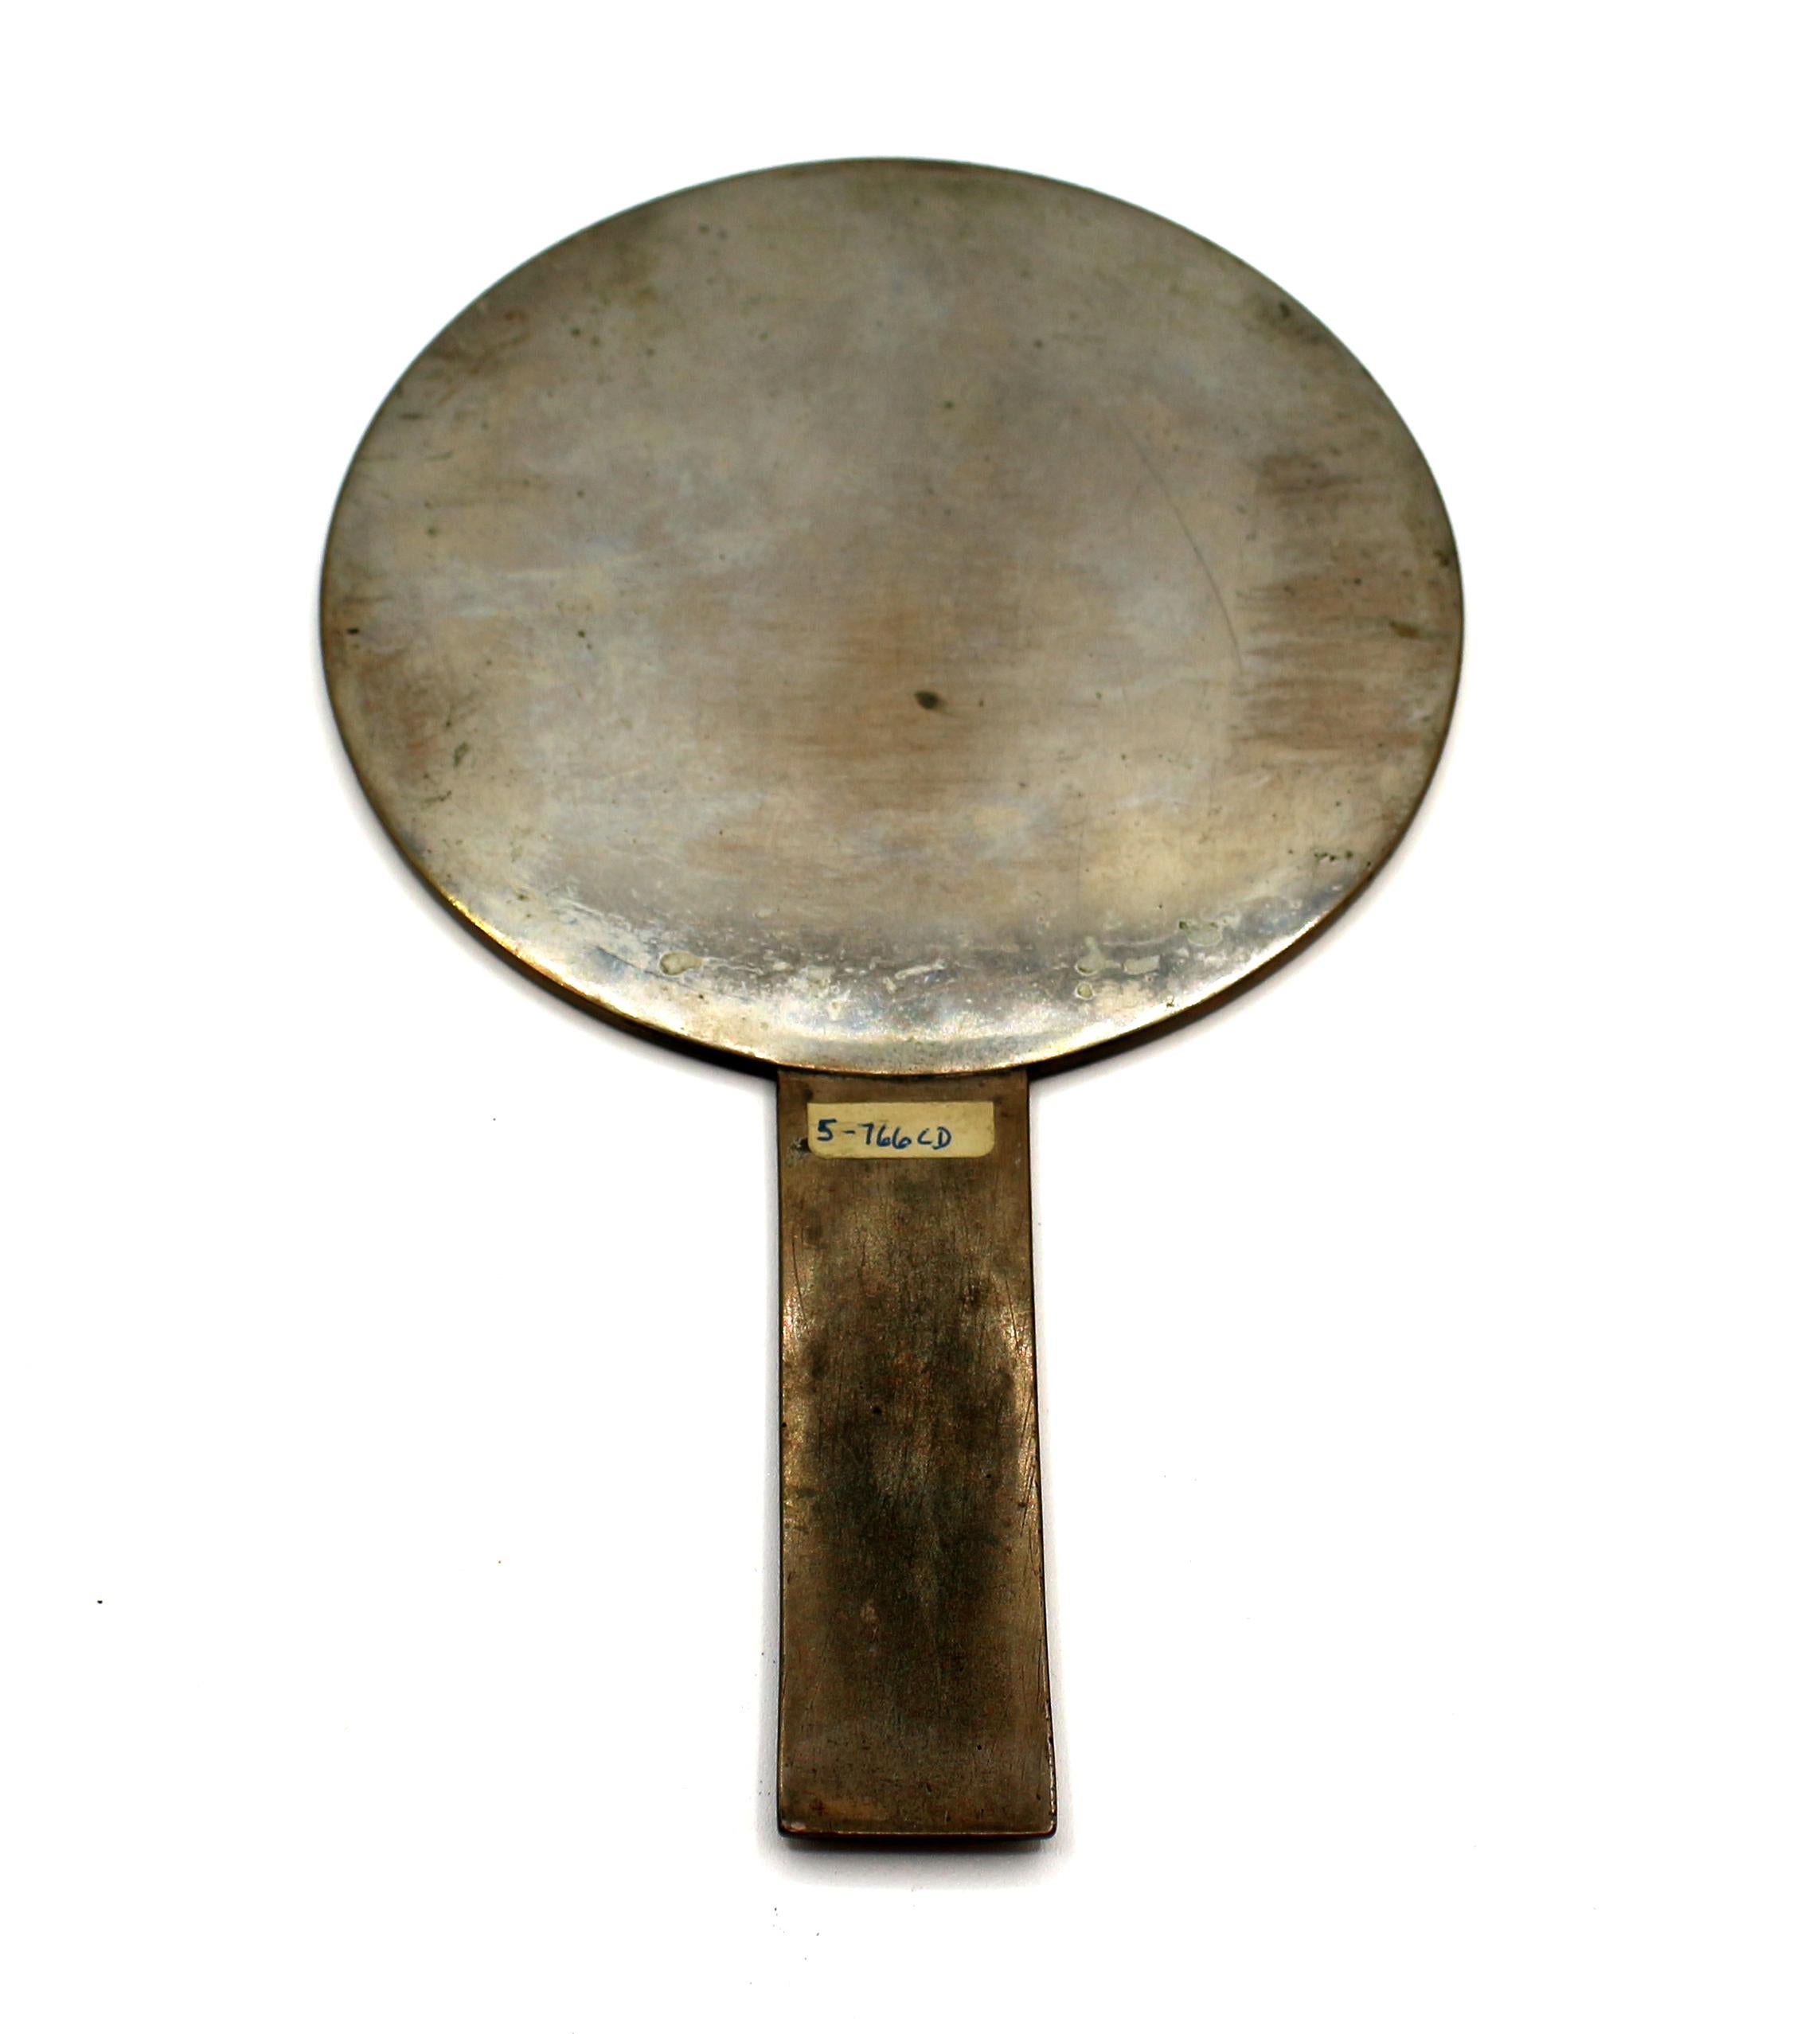 Mid-19th century Meiji period bronze hand mirror. Floral decoration with artist inscription & signature amongst the water lillies.

Measures: 9 3/4